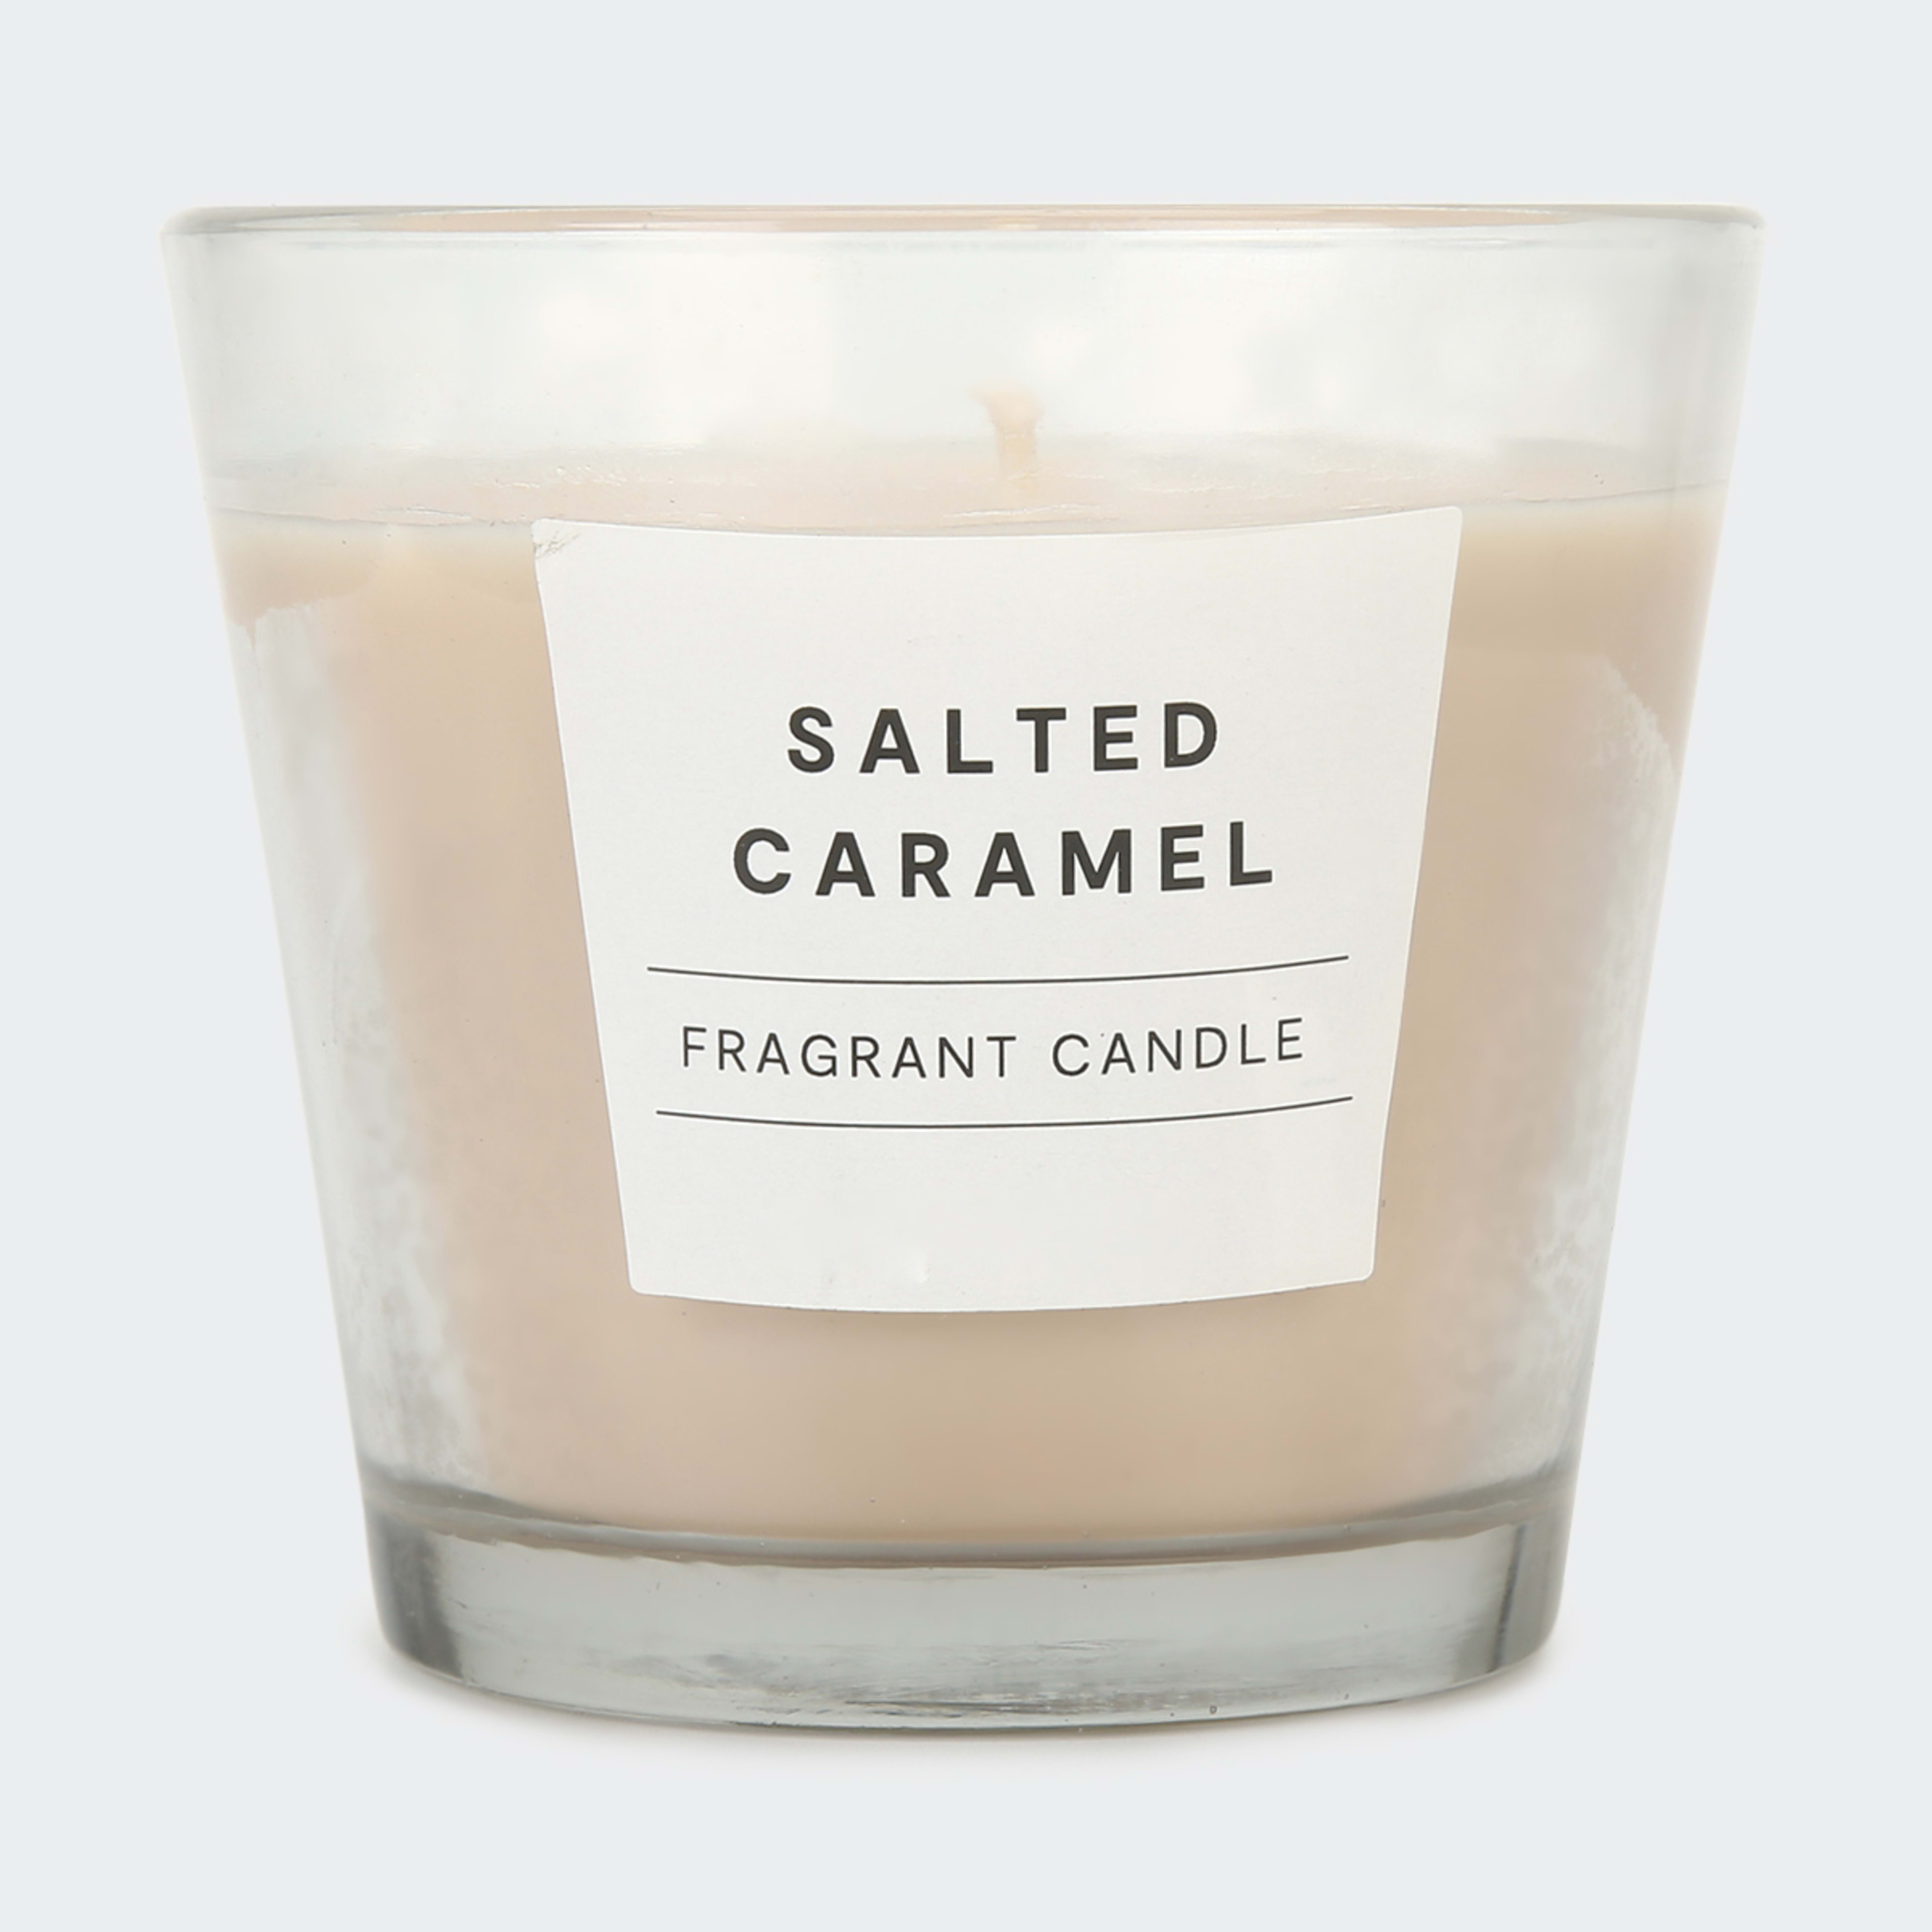 Salted Caramel Fragrant Candle in Glass